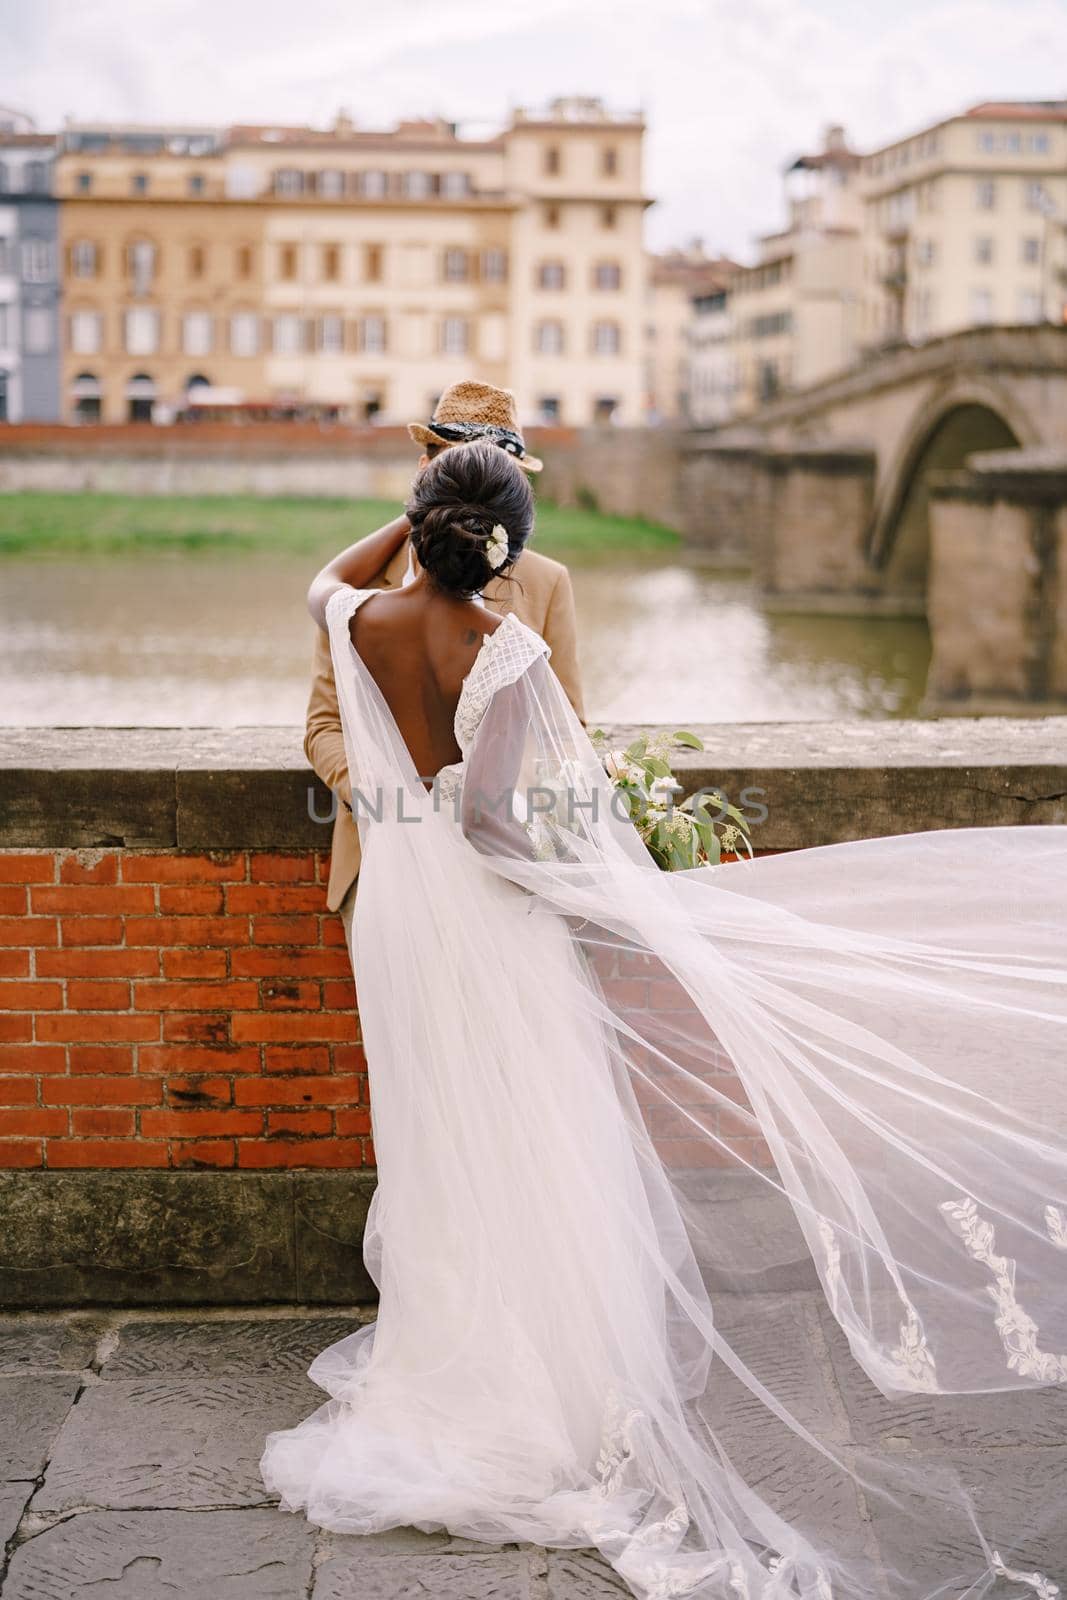 Multiracial wedding couple. Wedding in Florence, Italy. African-American bride and Caucasian groom stand embracing on the embankment of the Arno River, overlooking the city and bridges. by Nadtochiy